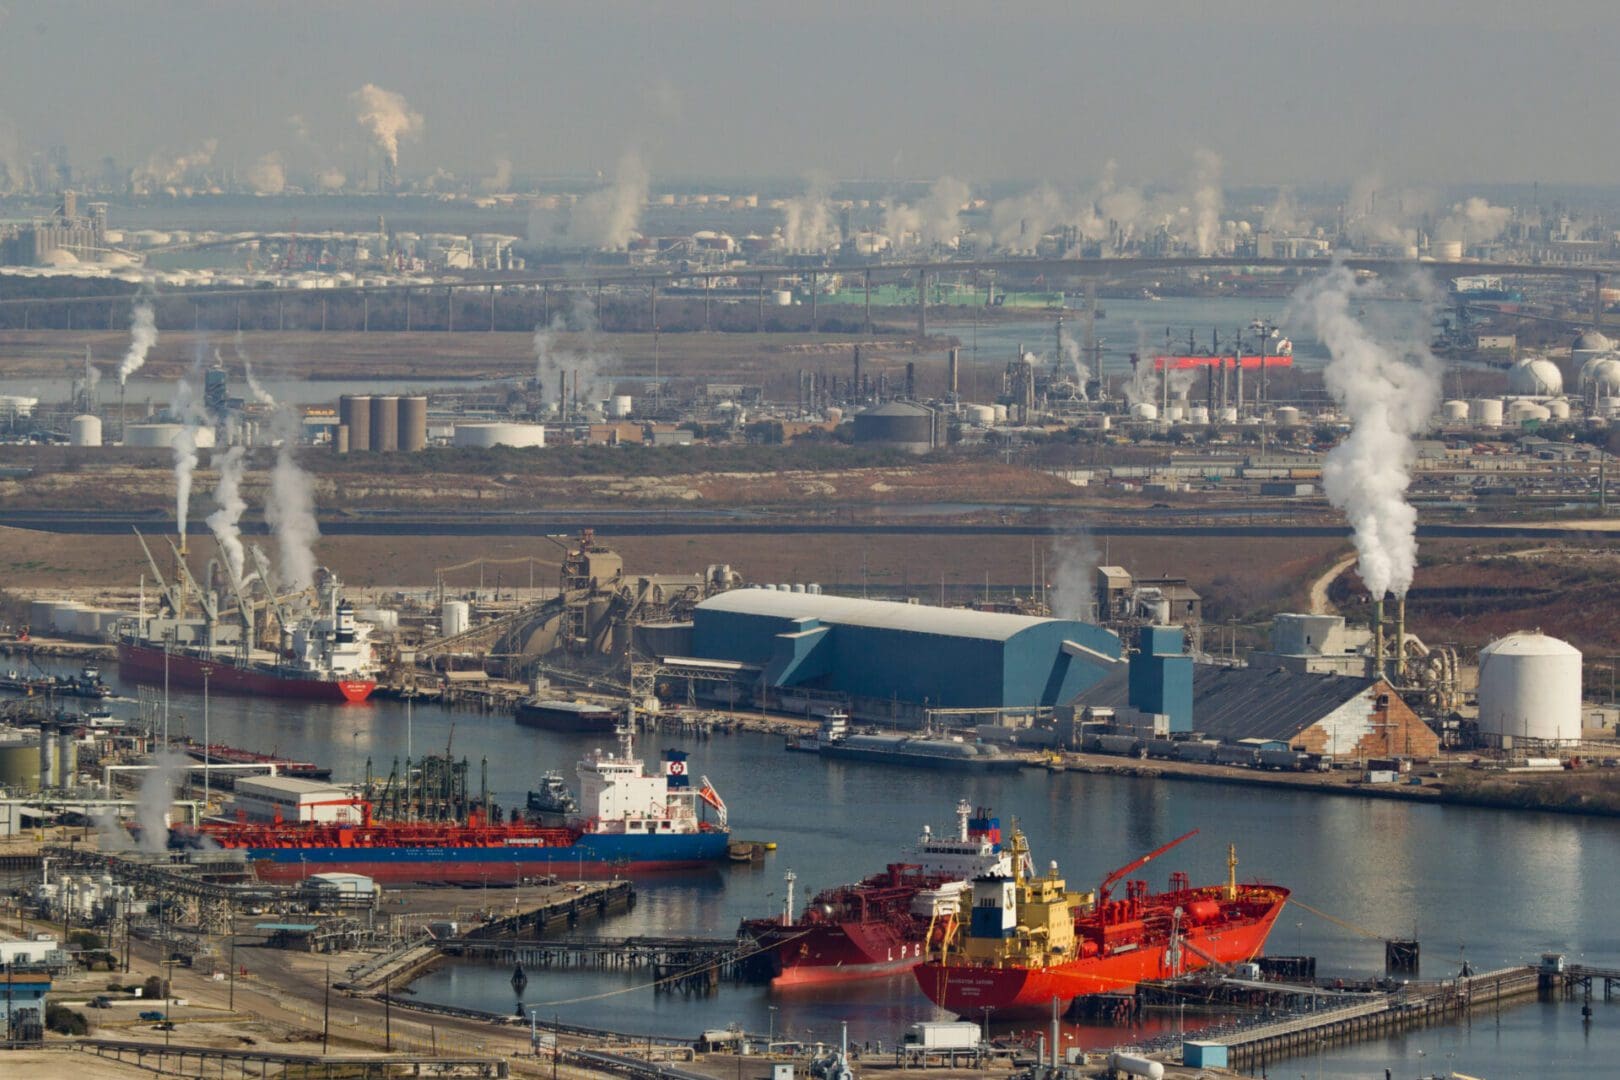 Industry along the Houston Ship Channel seen in an aerial view shot on Friday, Jan. 21, 2011, in Houston. ( Smiley N. Pool / Houston Chronicle ) (Photo by Smiley N. Pool/Houston Chronicle via Getty Images)